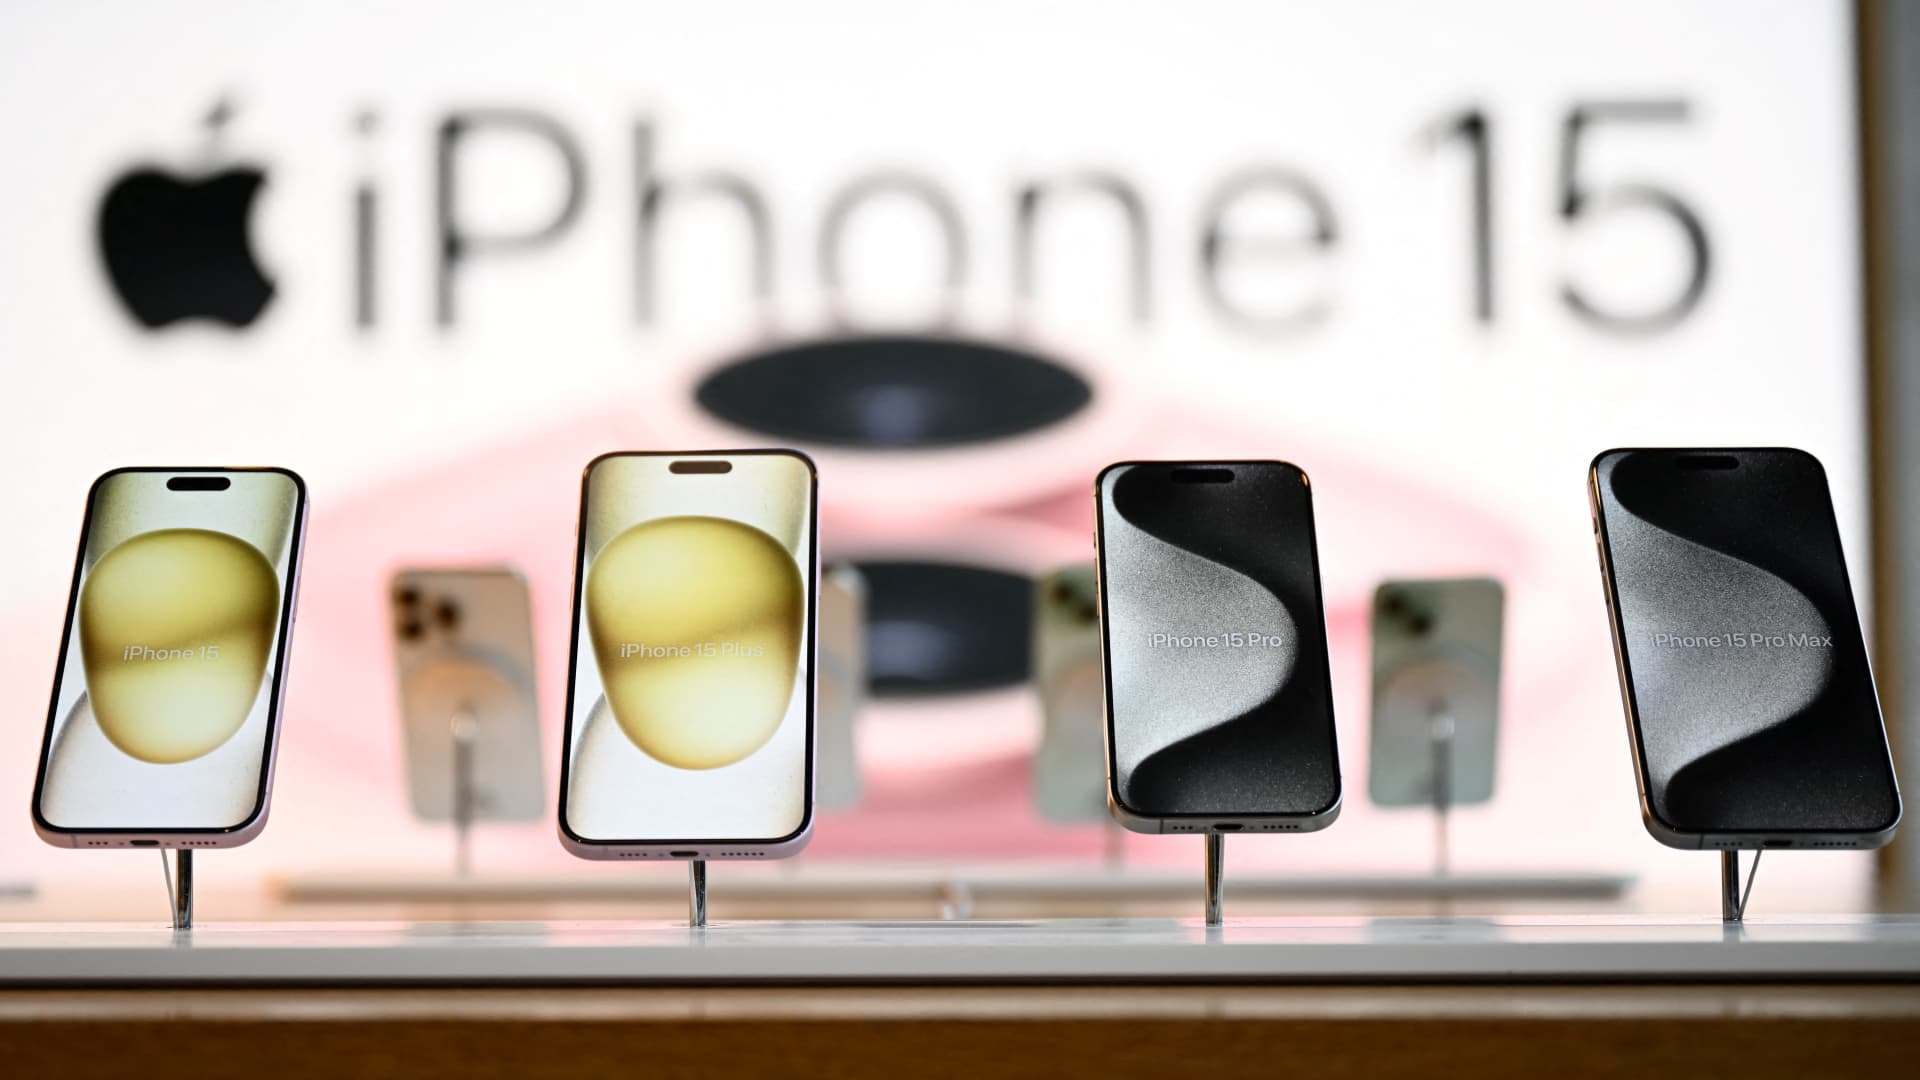 Apple iPhone sales drop 19% in China as Huawei demand soars: Counterpoint